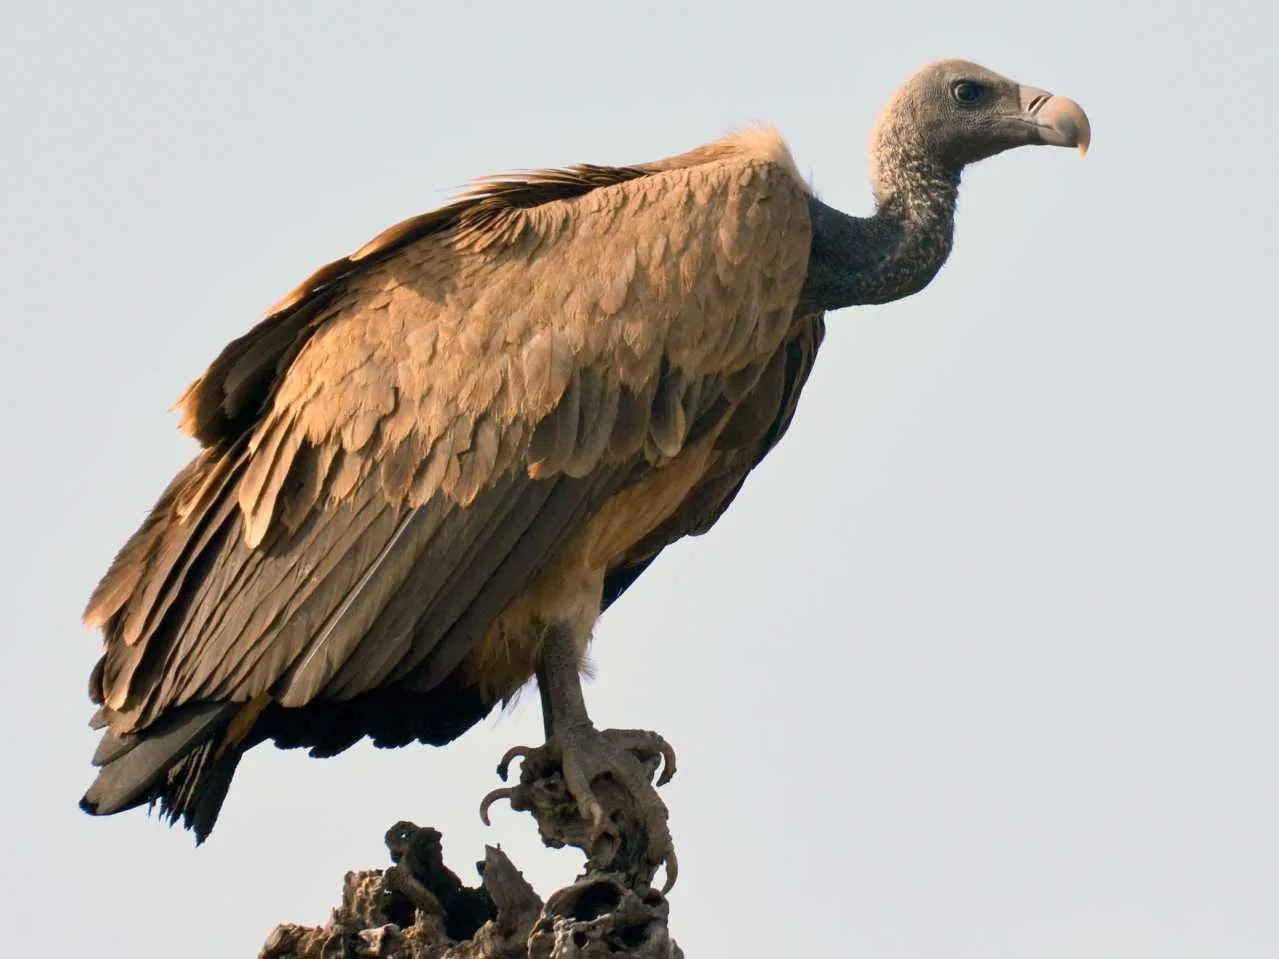 Indian Vulture 